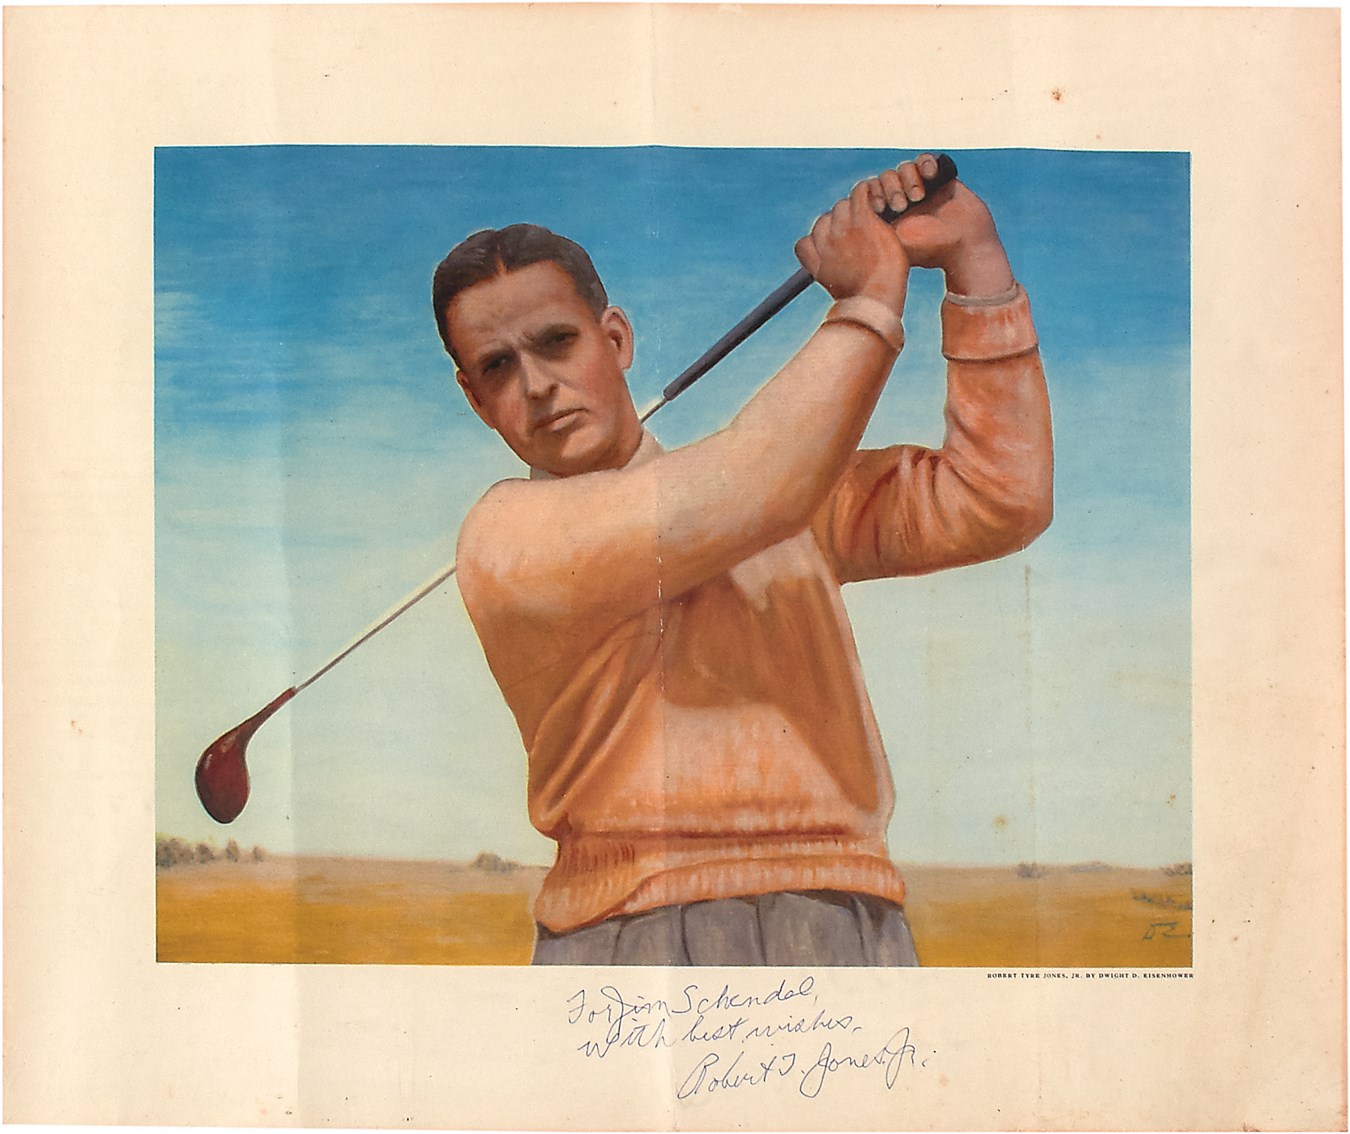 Jim Schendel Autograph Collection - 1970s Vintage Dwight Eisenhower Print Signed by Bobby Jones - Gifted to Schendel by Jones (PSA)